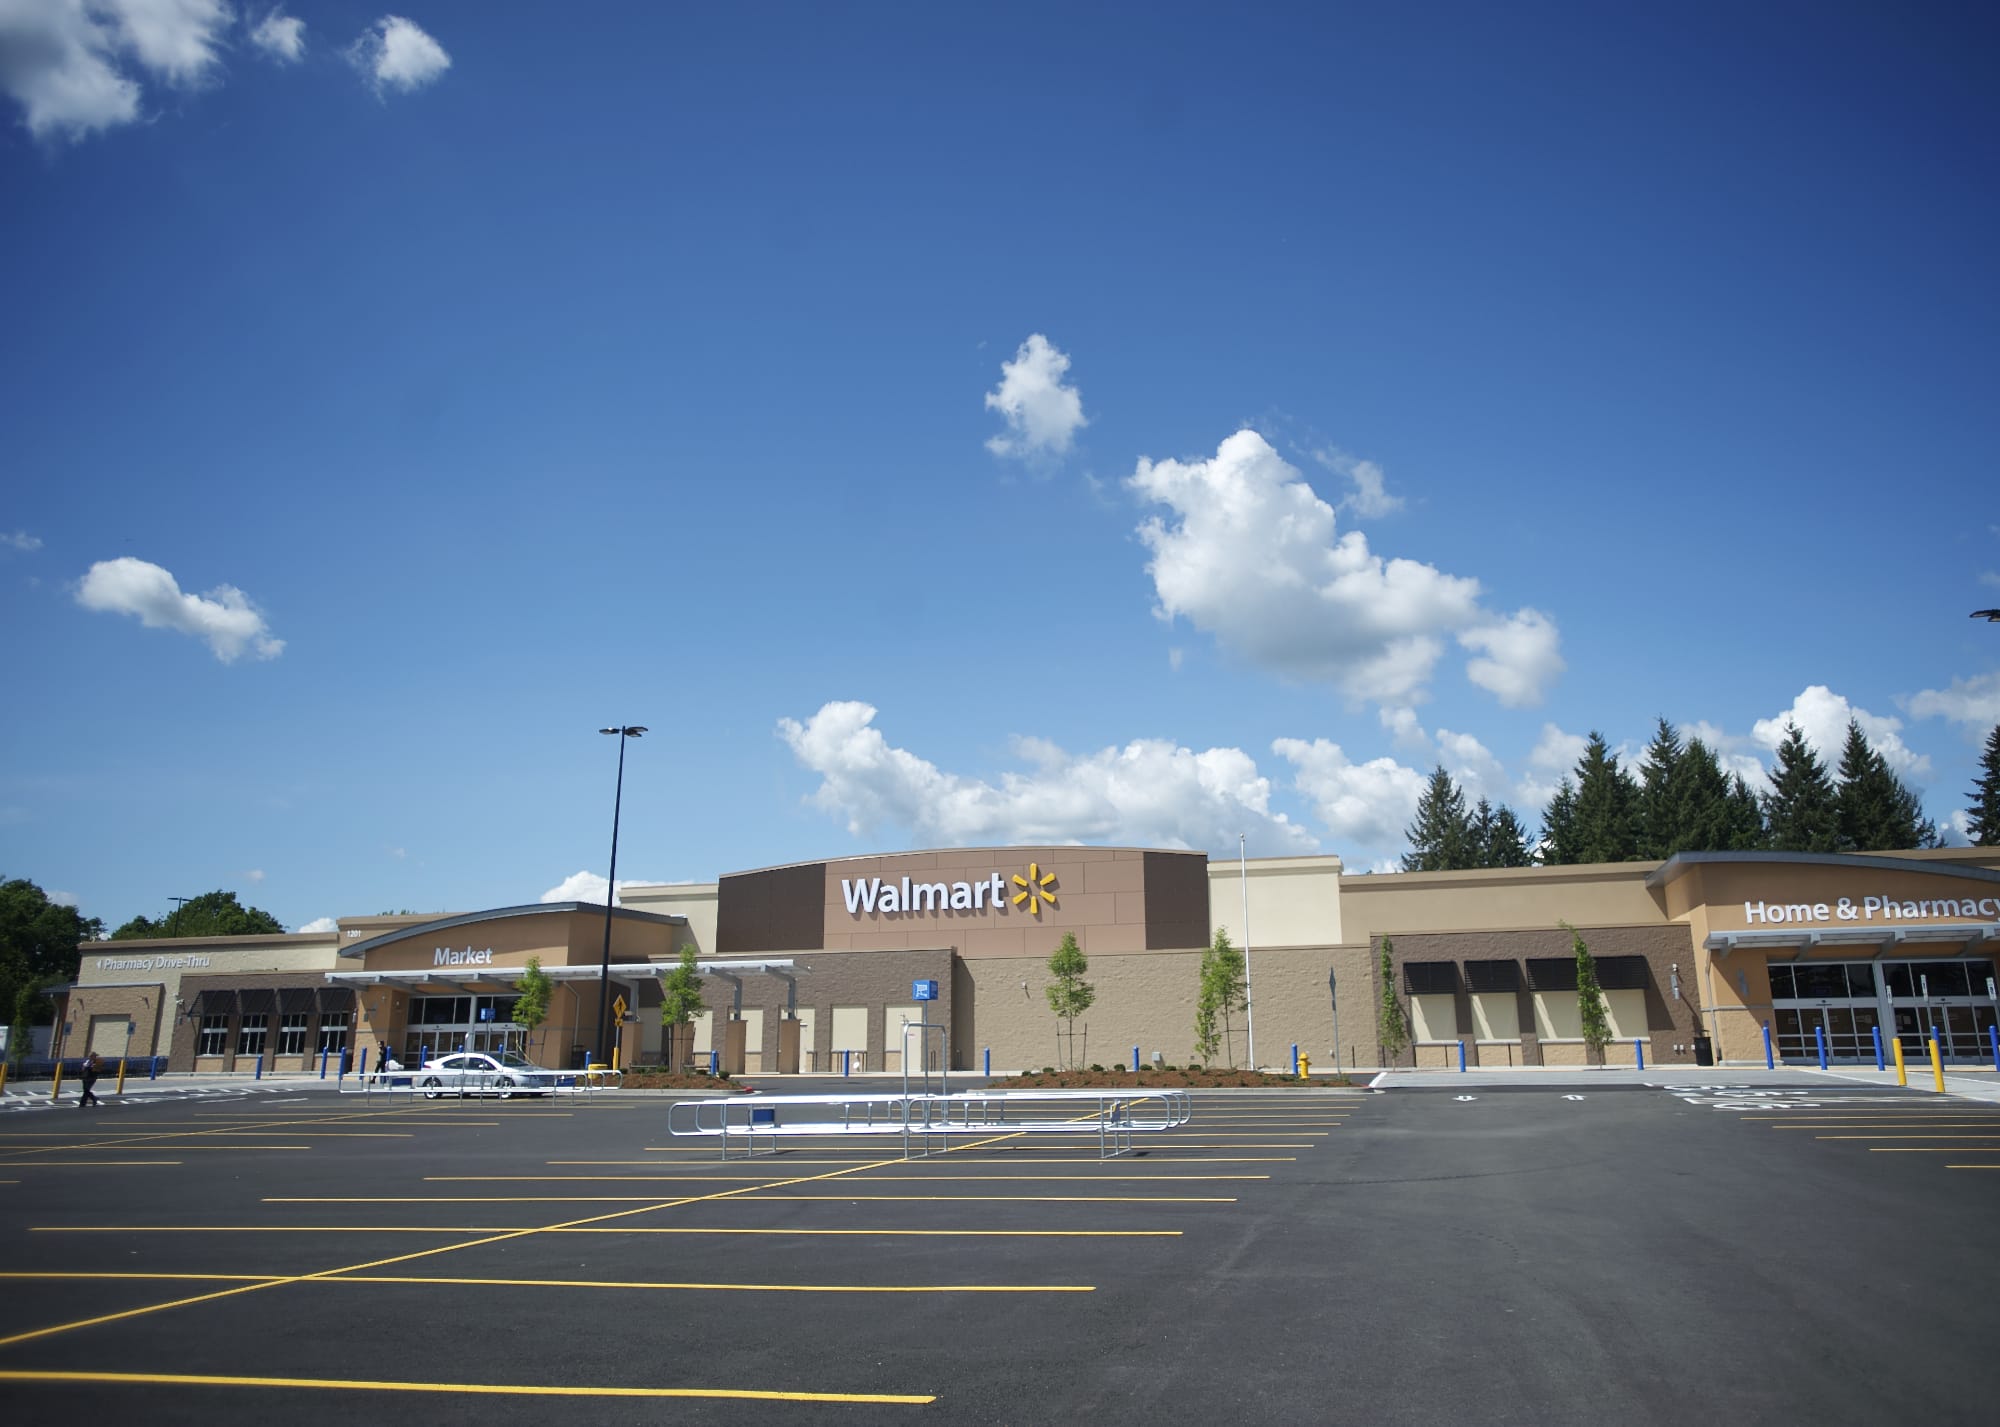 The Wal-Mart at state Highway 503 and Southwest Scotton Way will be open 24 hours a day and employ about 300 people.